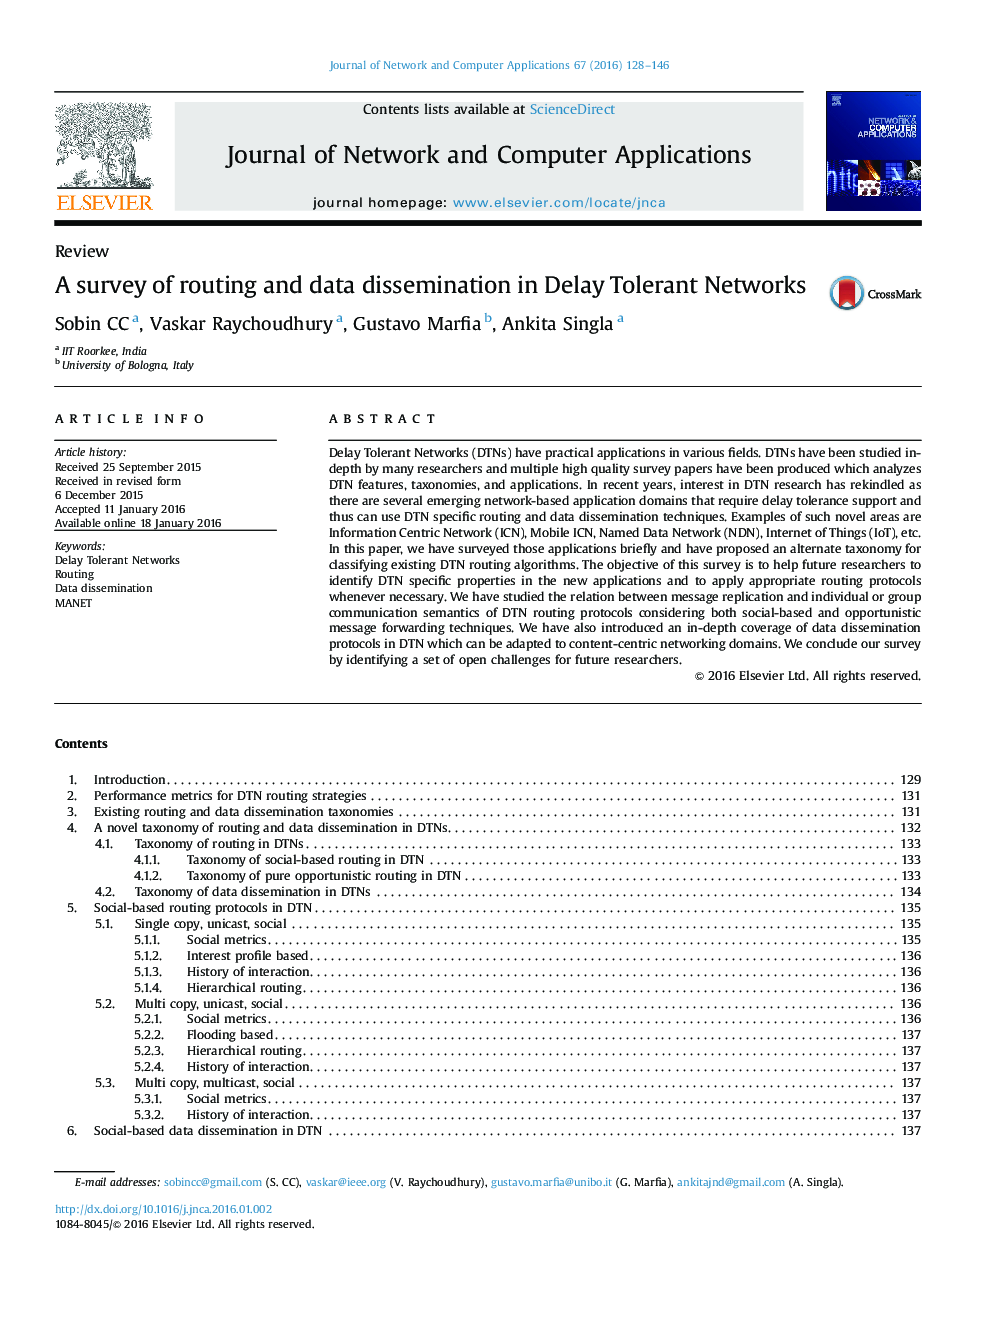 A survey of routing and data dissemination in Delay Tolerant Networks